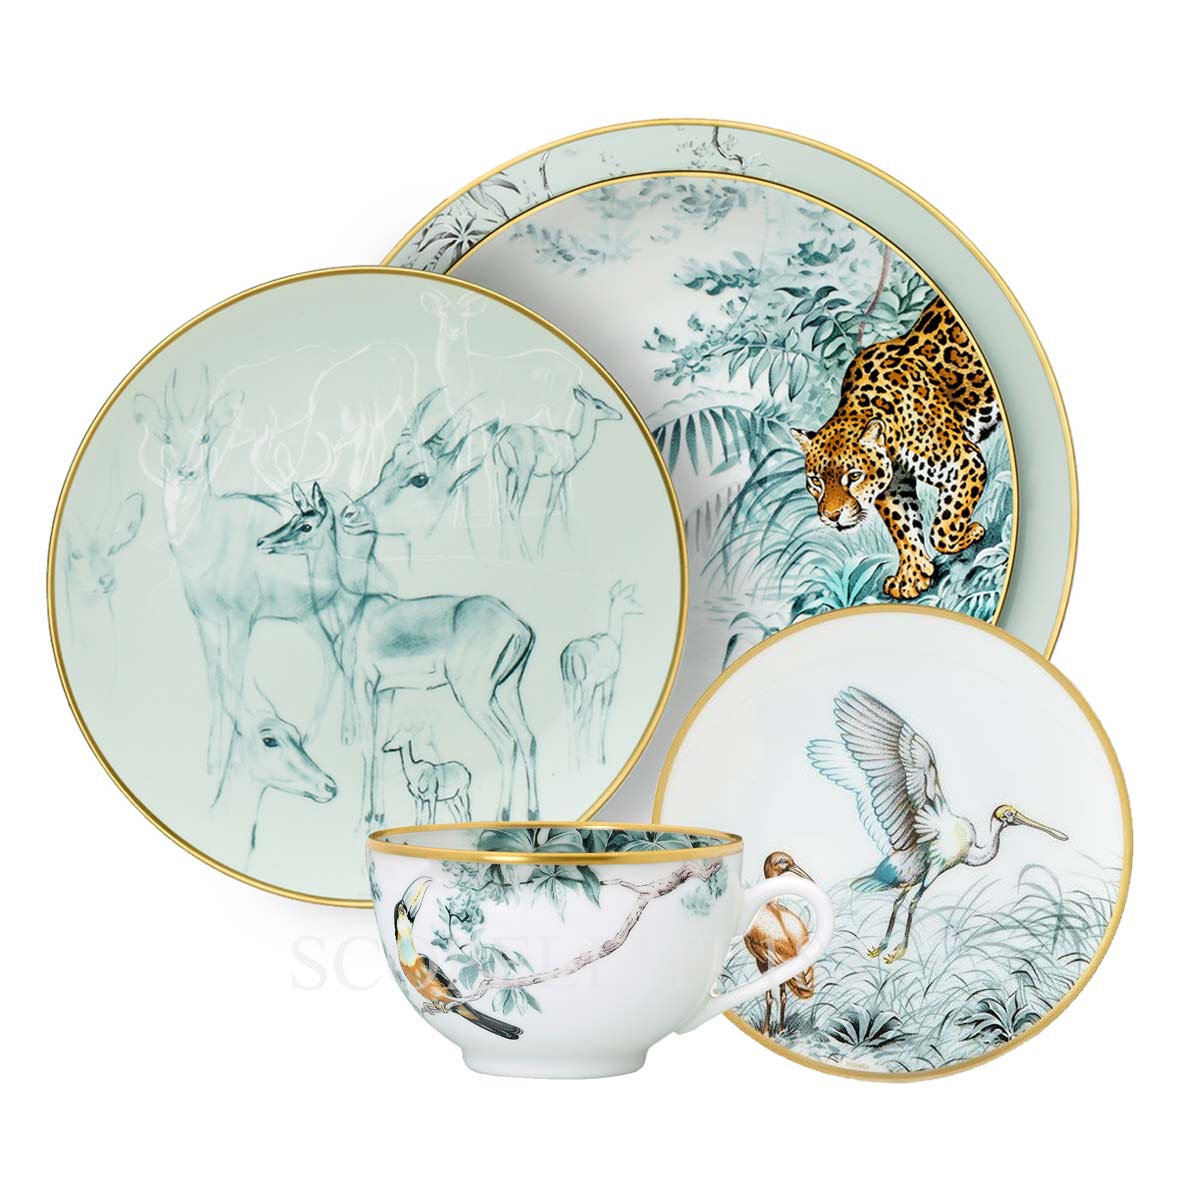 Porcelain Plates an Antique and Refined Work of Art   SCOPELLITI 20